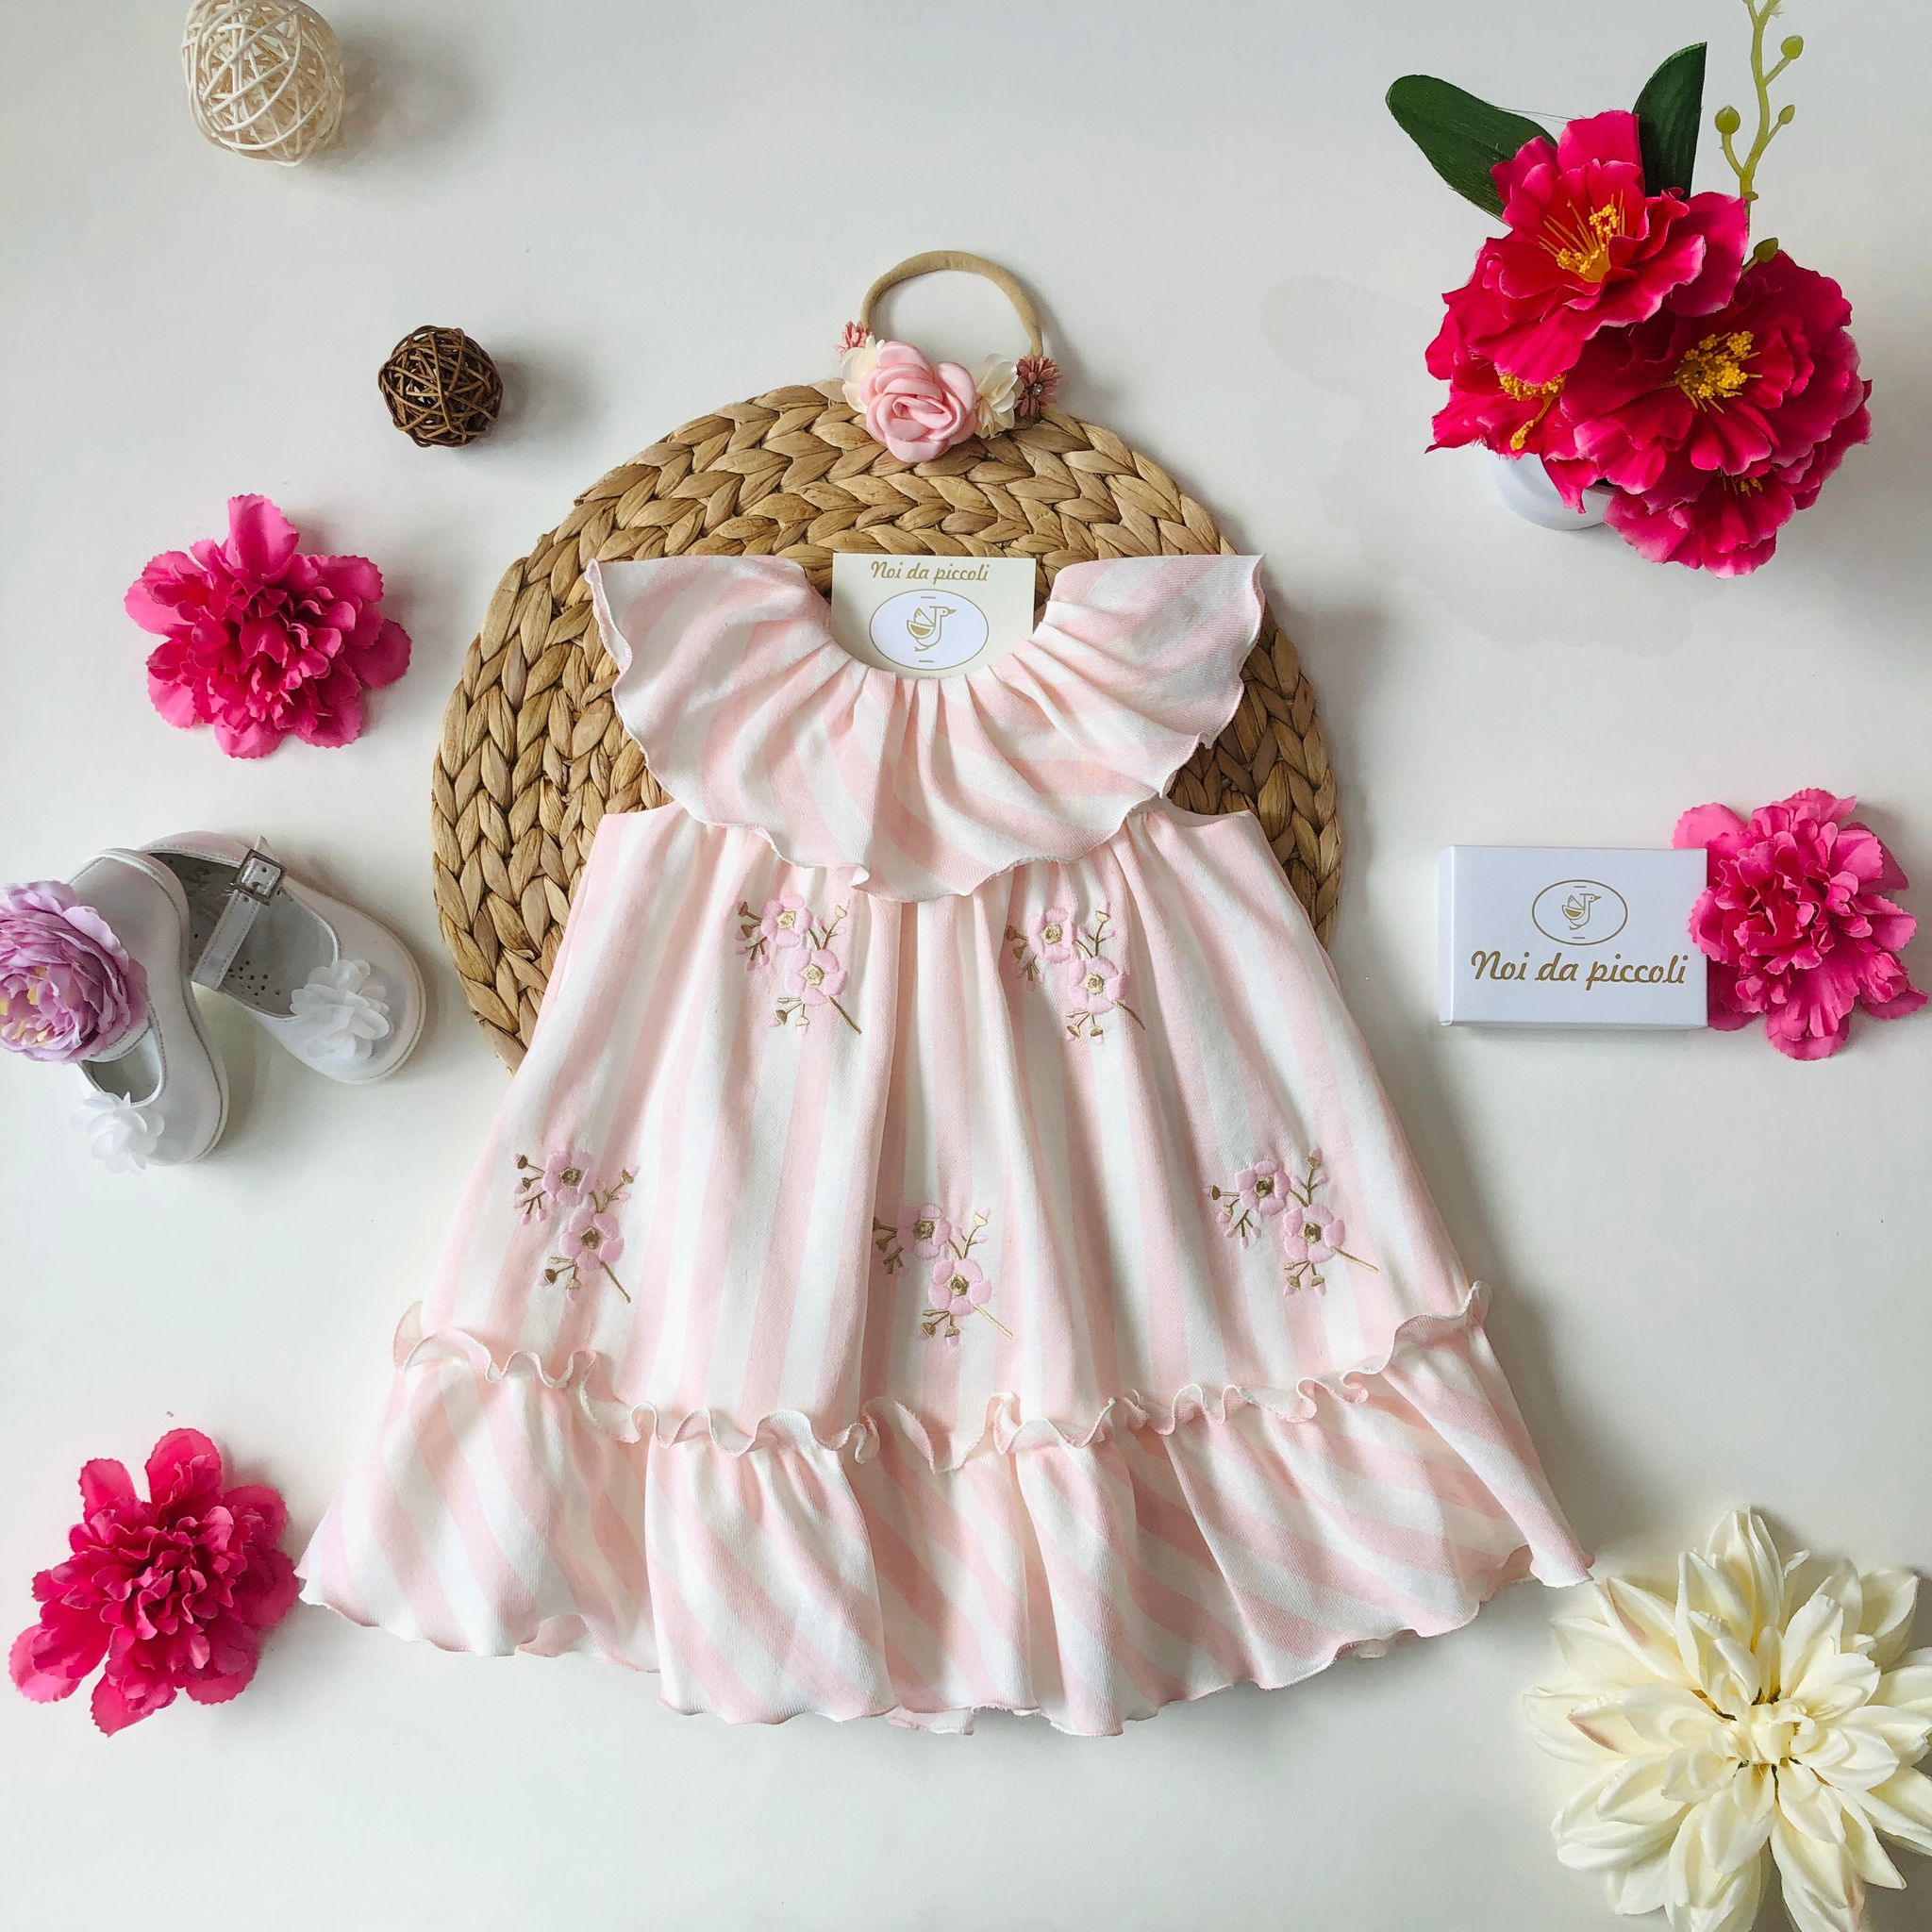 ELEGANT LINEN DRESS WITH LITTLE PINK AND CREAM FLOWERS